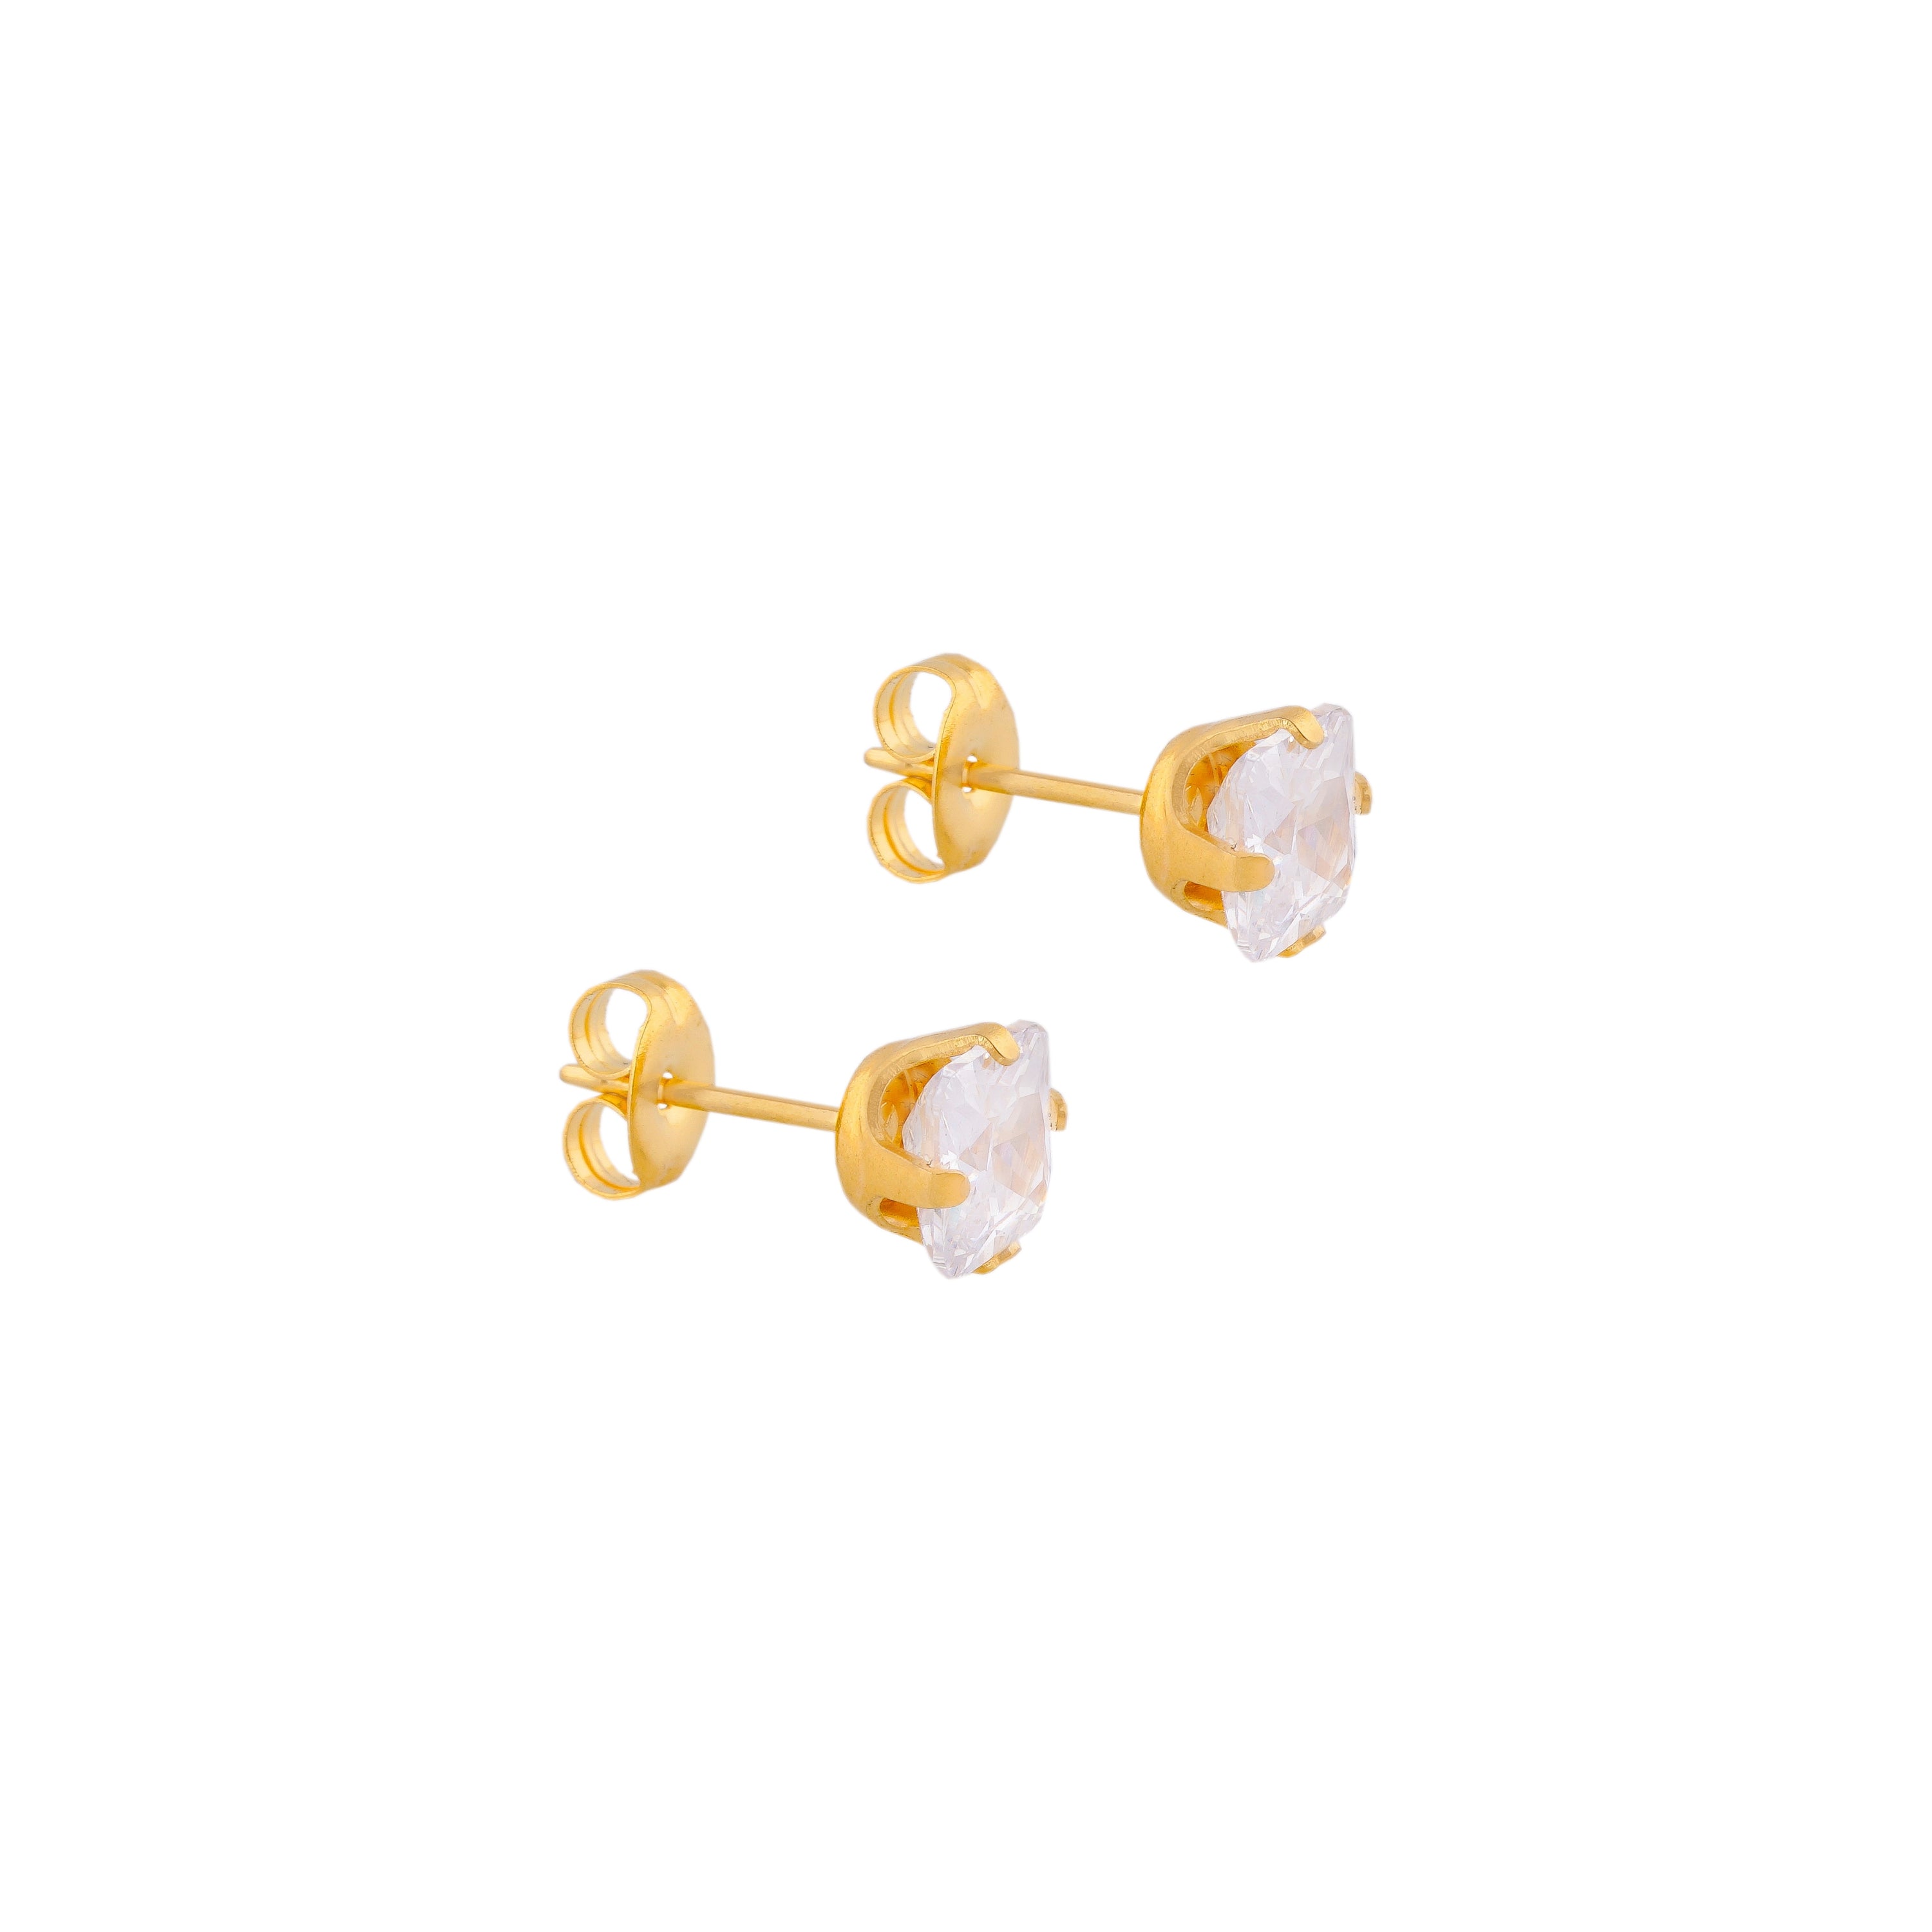 6X6MM Cubic Zirconia 24K Pure Gold Plated Ear Studs | MADE IN USA | Ideal for everyday wear